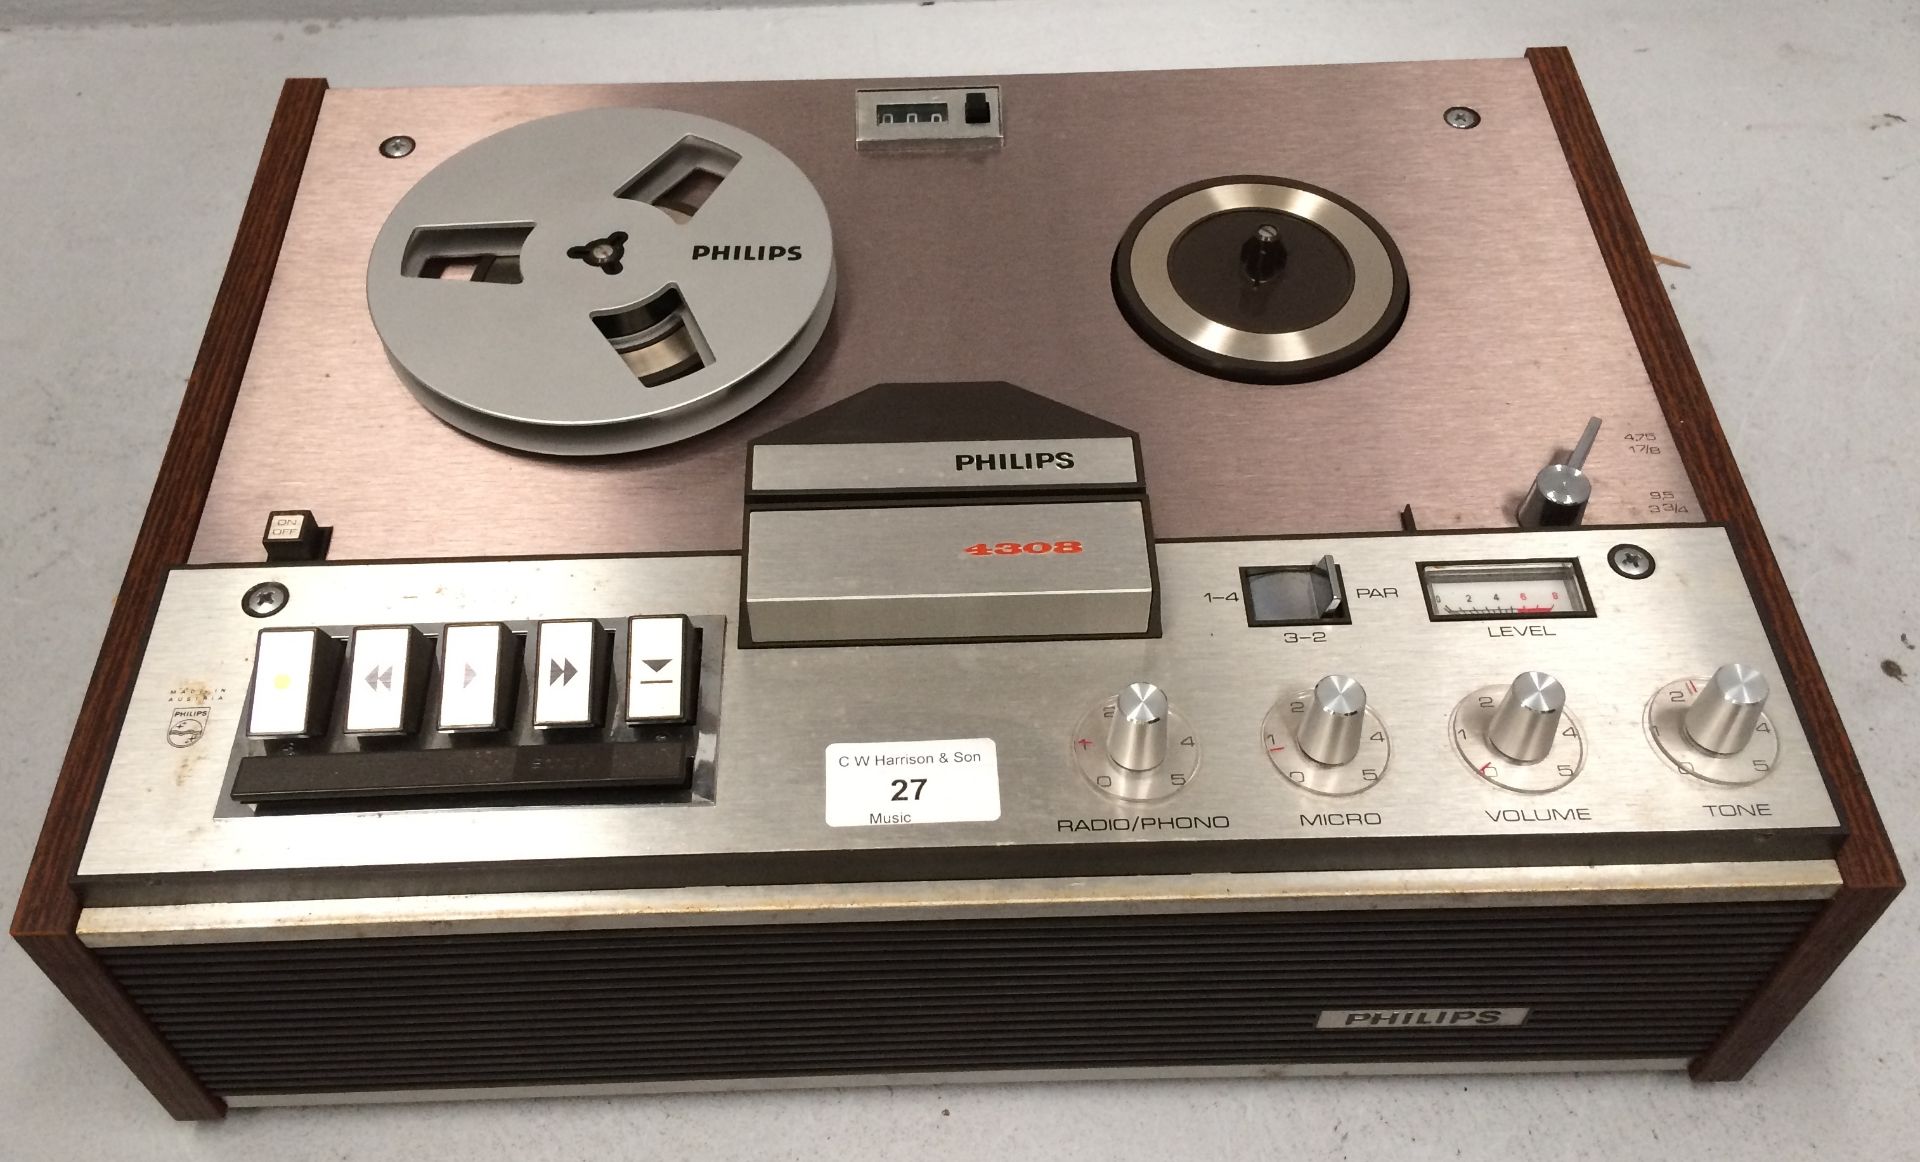 Philips 4308 reel to reel player - no lead